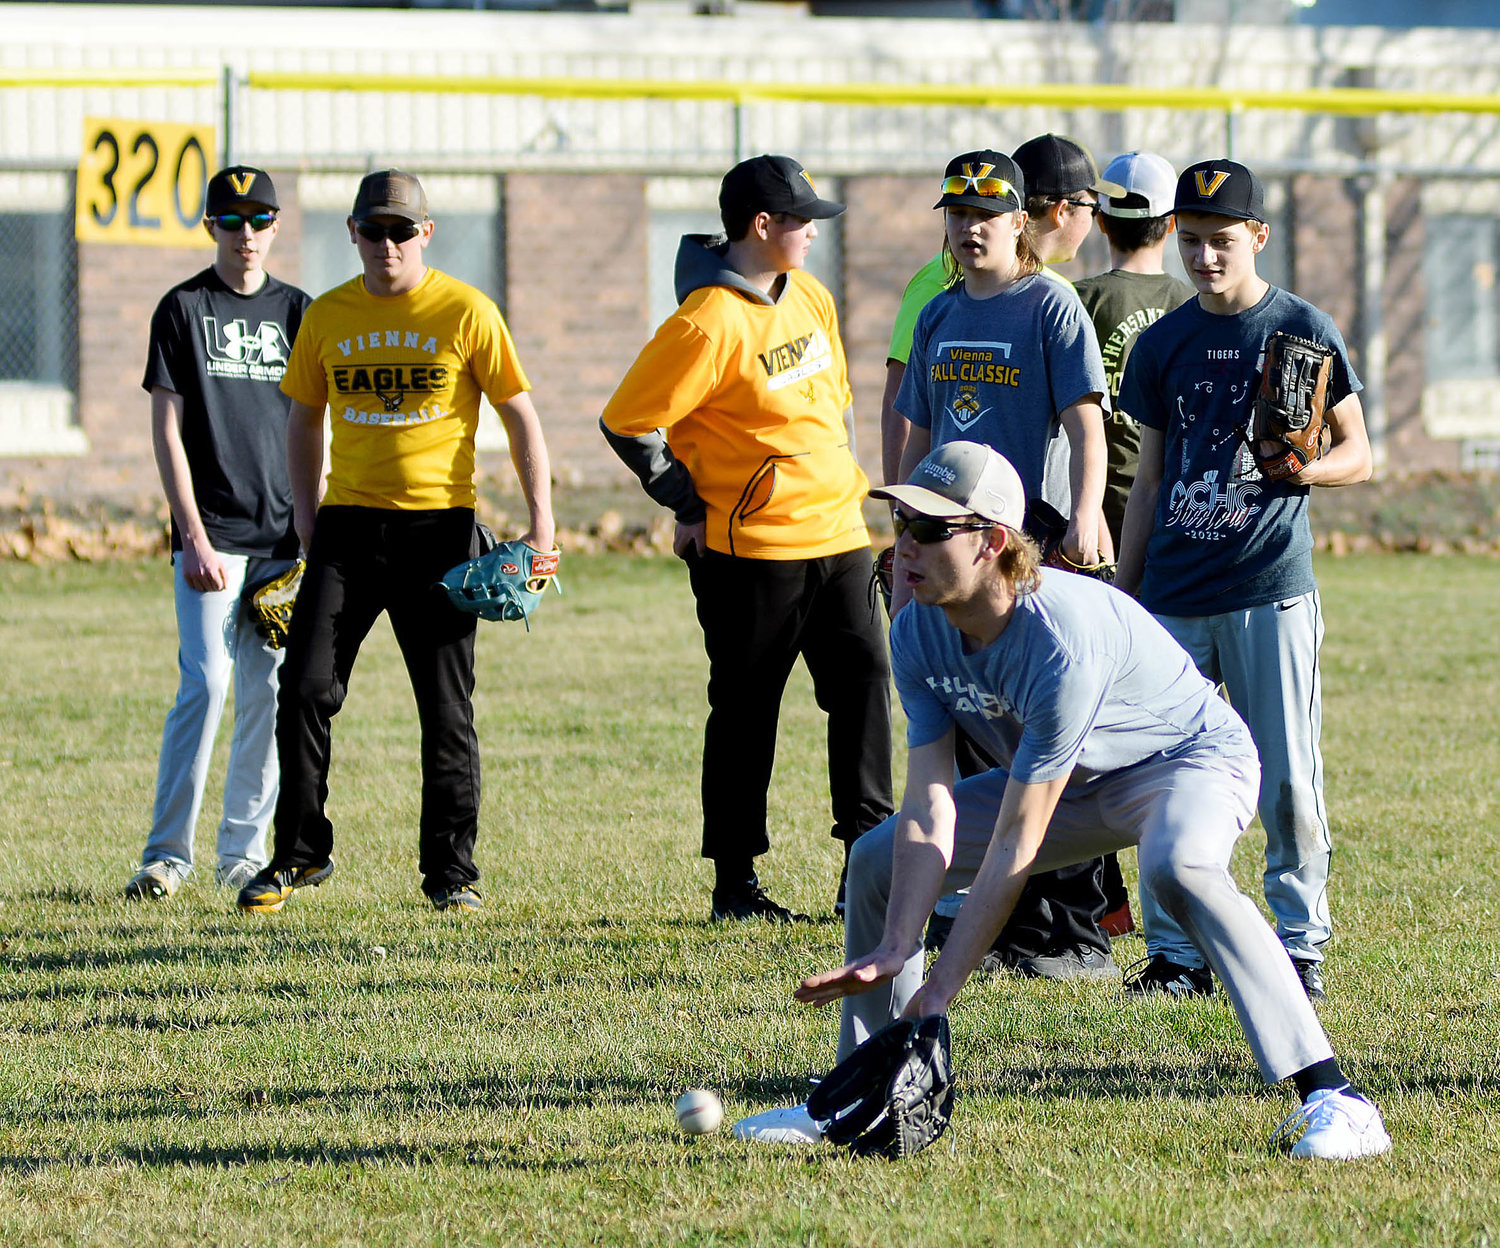 Sam Rowden fields a ground ball in the outfield at Vienna City Park during a recent practice session for Vienna Eagle baseball. Weather and field conditions permitting, they will host a four-team jamboree Friday night beginning at 4:30 p.m. Teams competing along with the host Eagles include Clopton’s Hawks, Iberia’s Rangers and Stoutland’s Tigers.